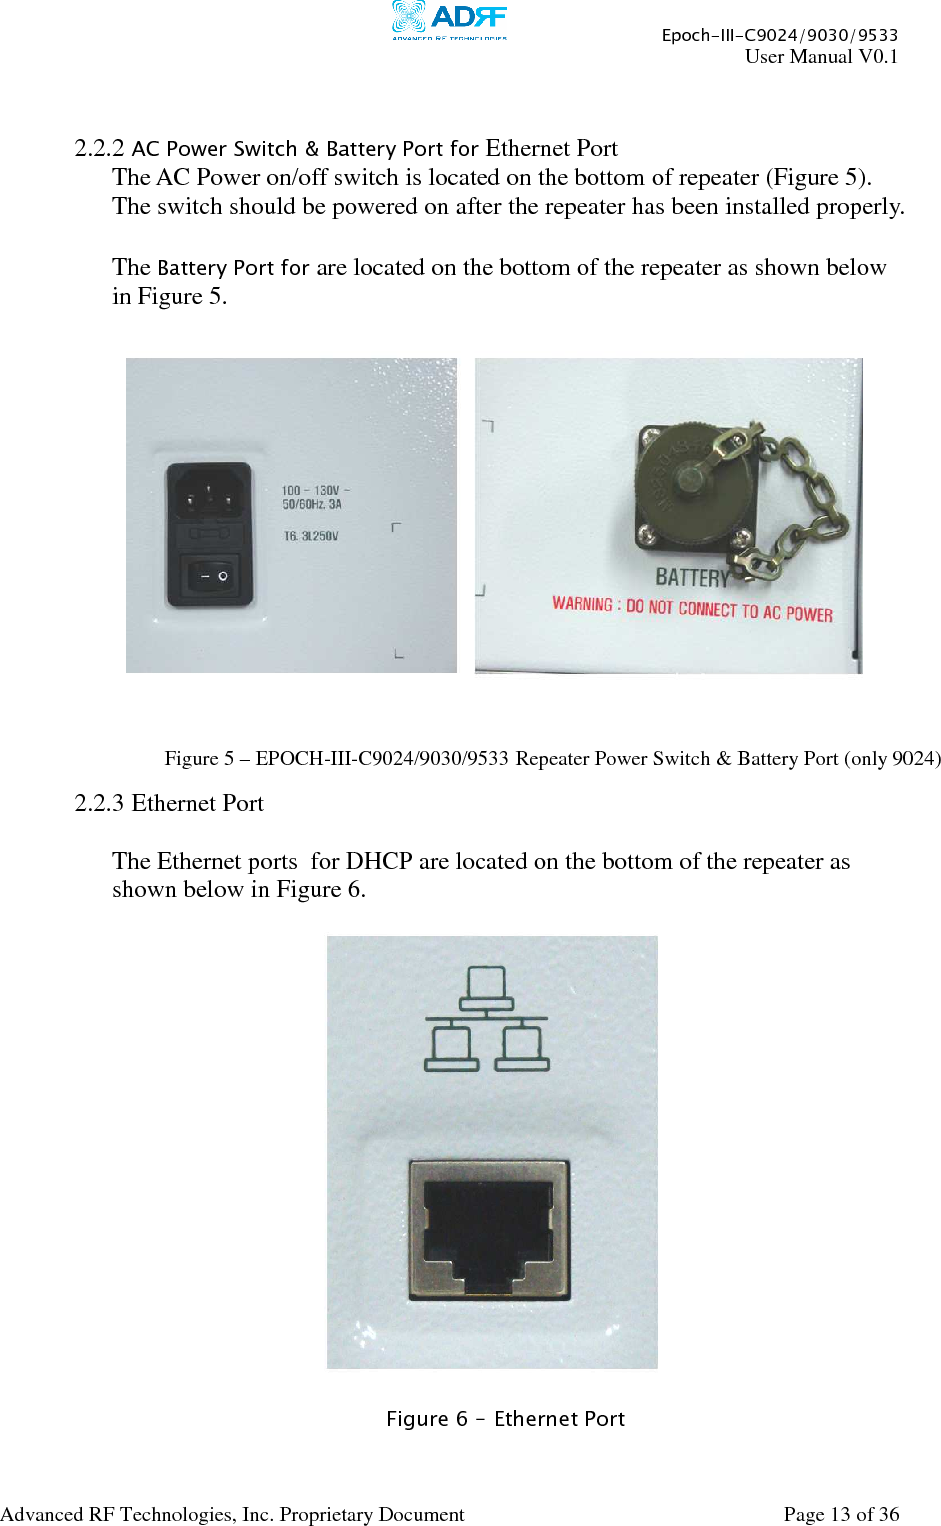     Epoch-III-C9024/9030/9533 User Manual V0.1  Advanced RF Technologies, Inc. Proprietary Document  Page 13 of 36    2.2.2 AC Power Switch &amp; Battery Port for Ethernet Port The AC Power on/off switch is located on the bottom of repeater (Figure 5).  The switch should be powered on after the repeater has been installed properly.  The Battery Port for are located on the bottom of the repeater as shown below in Figure 5.      2.2.3 Ethernet Port   The Ethernet ports  for DHCP are located on the bottom of the repeater as shown below in Figure 6.      Figure 6 – Ethernet Port  Figure 5 – EPOCH-III-C9024/9030/9533 Repeater Power Switch &amp; Battery Port (only 9024) 